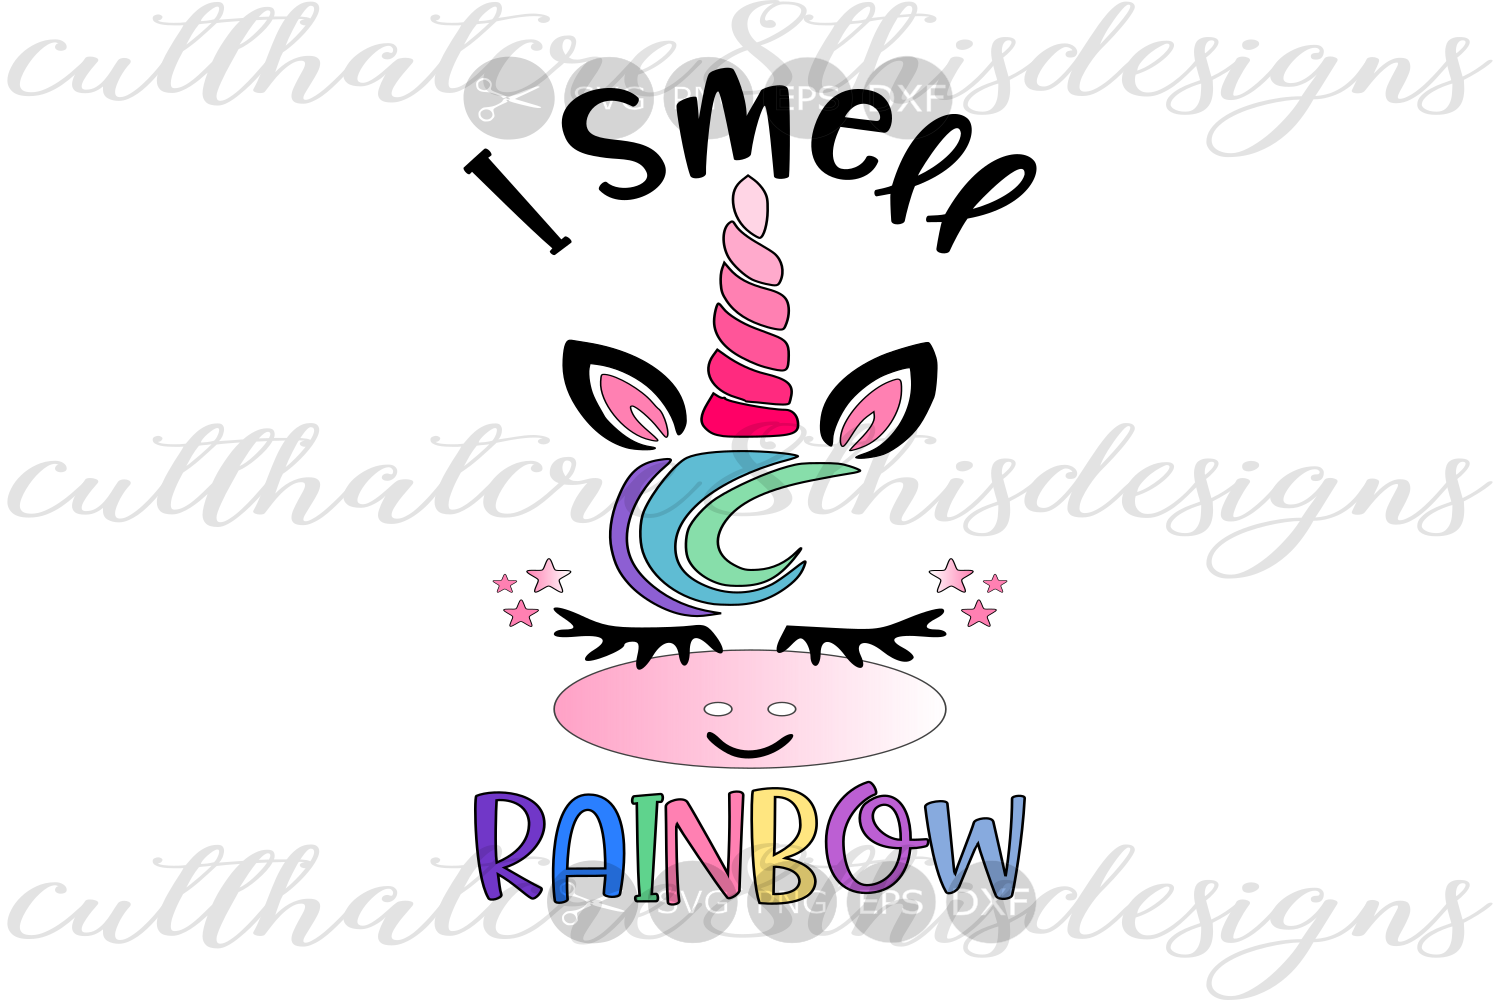 I Smell Rainbow, Unicorn, Colourful, Quotes, Sayings, Cut File, SVG